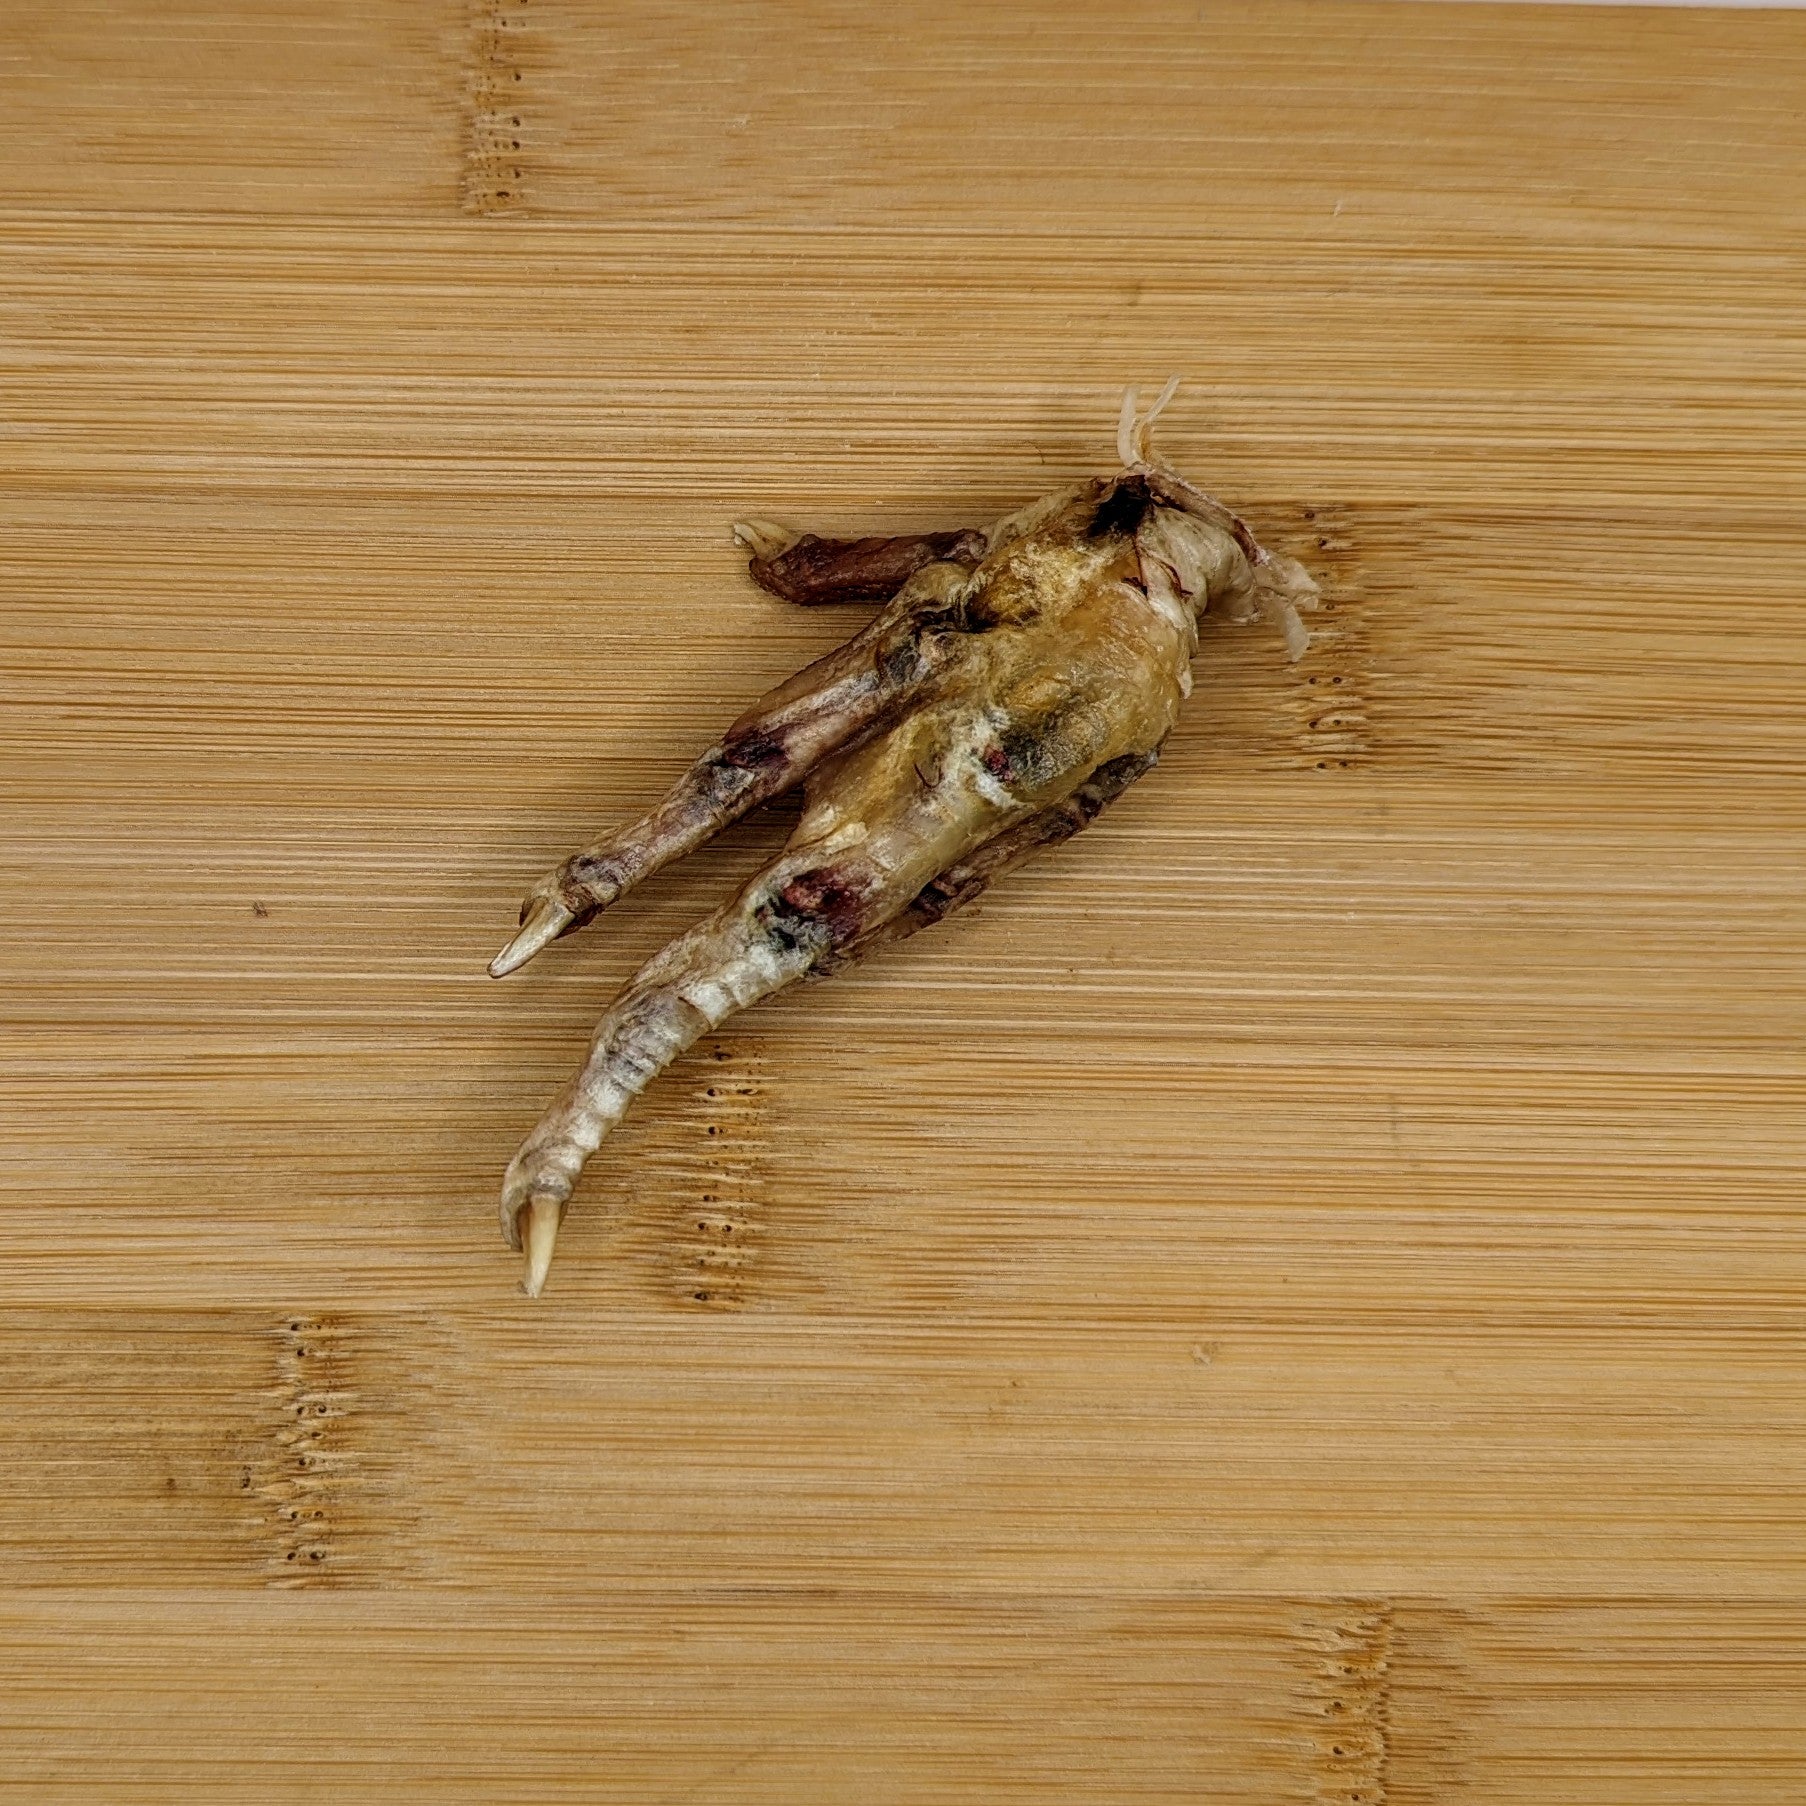 A dried, small bird carcass with visible feathers, beak, and chicken feet lying on a wooden surface. - A dehydrated Beast Feast Chicken Foot with visible feathers, beak, and chicken feet lying on a wooden surface.